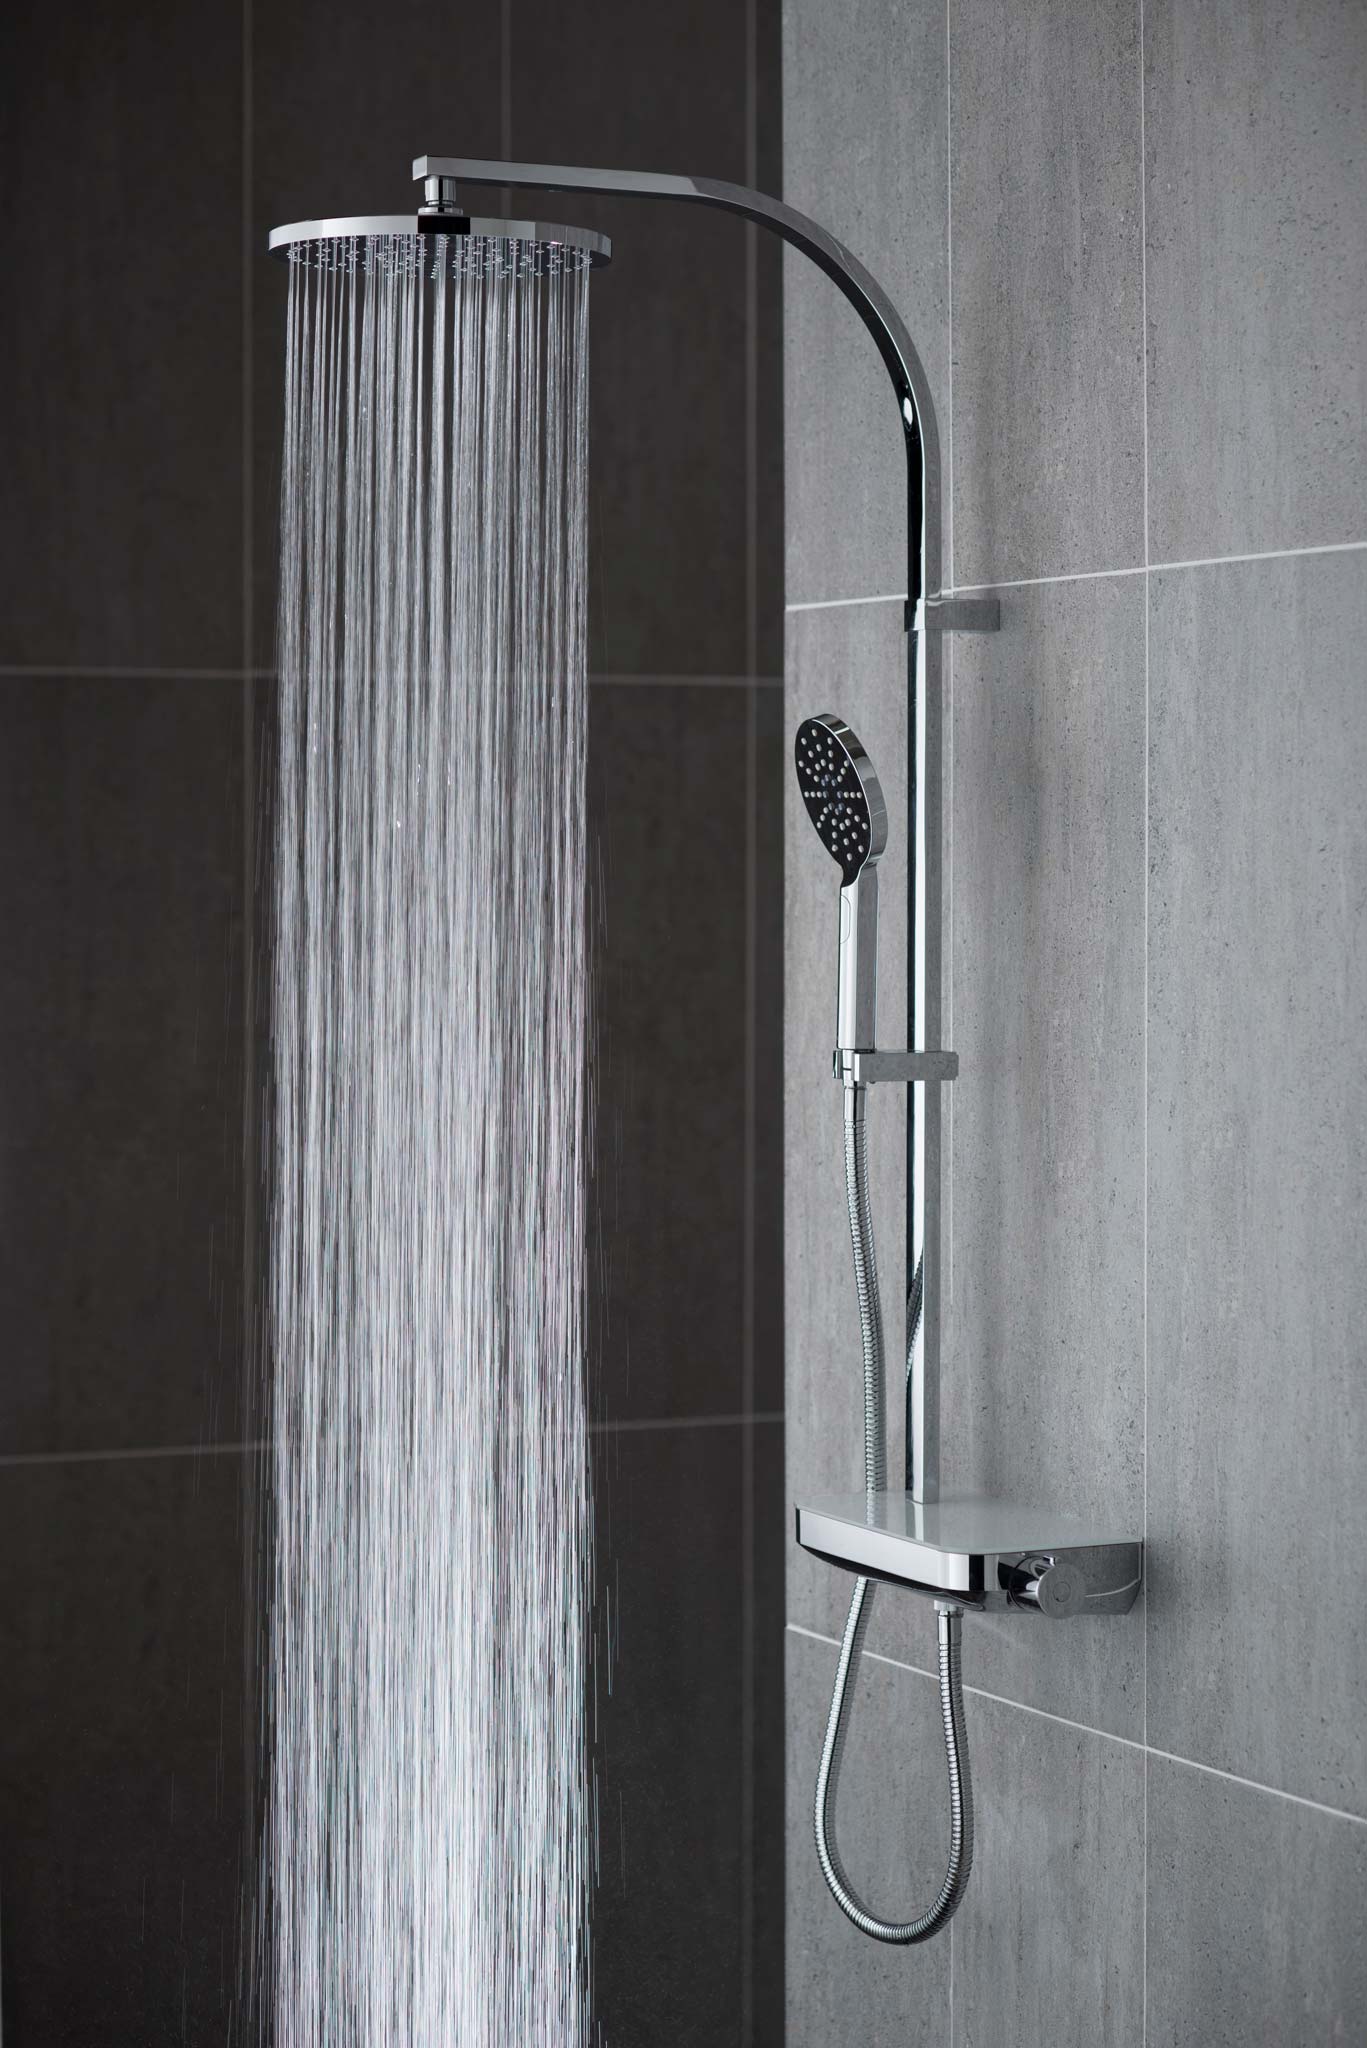 Modern round rigid riser in a grey tiled room with water cascading out of the shower head, shutter speed 1/40th second